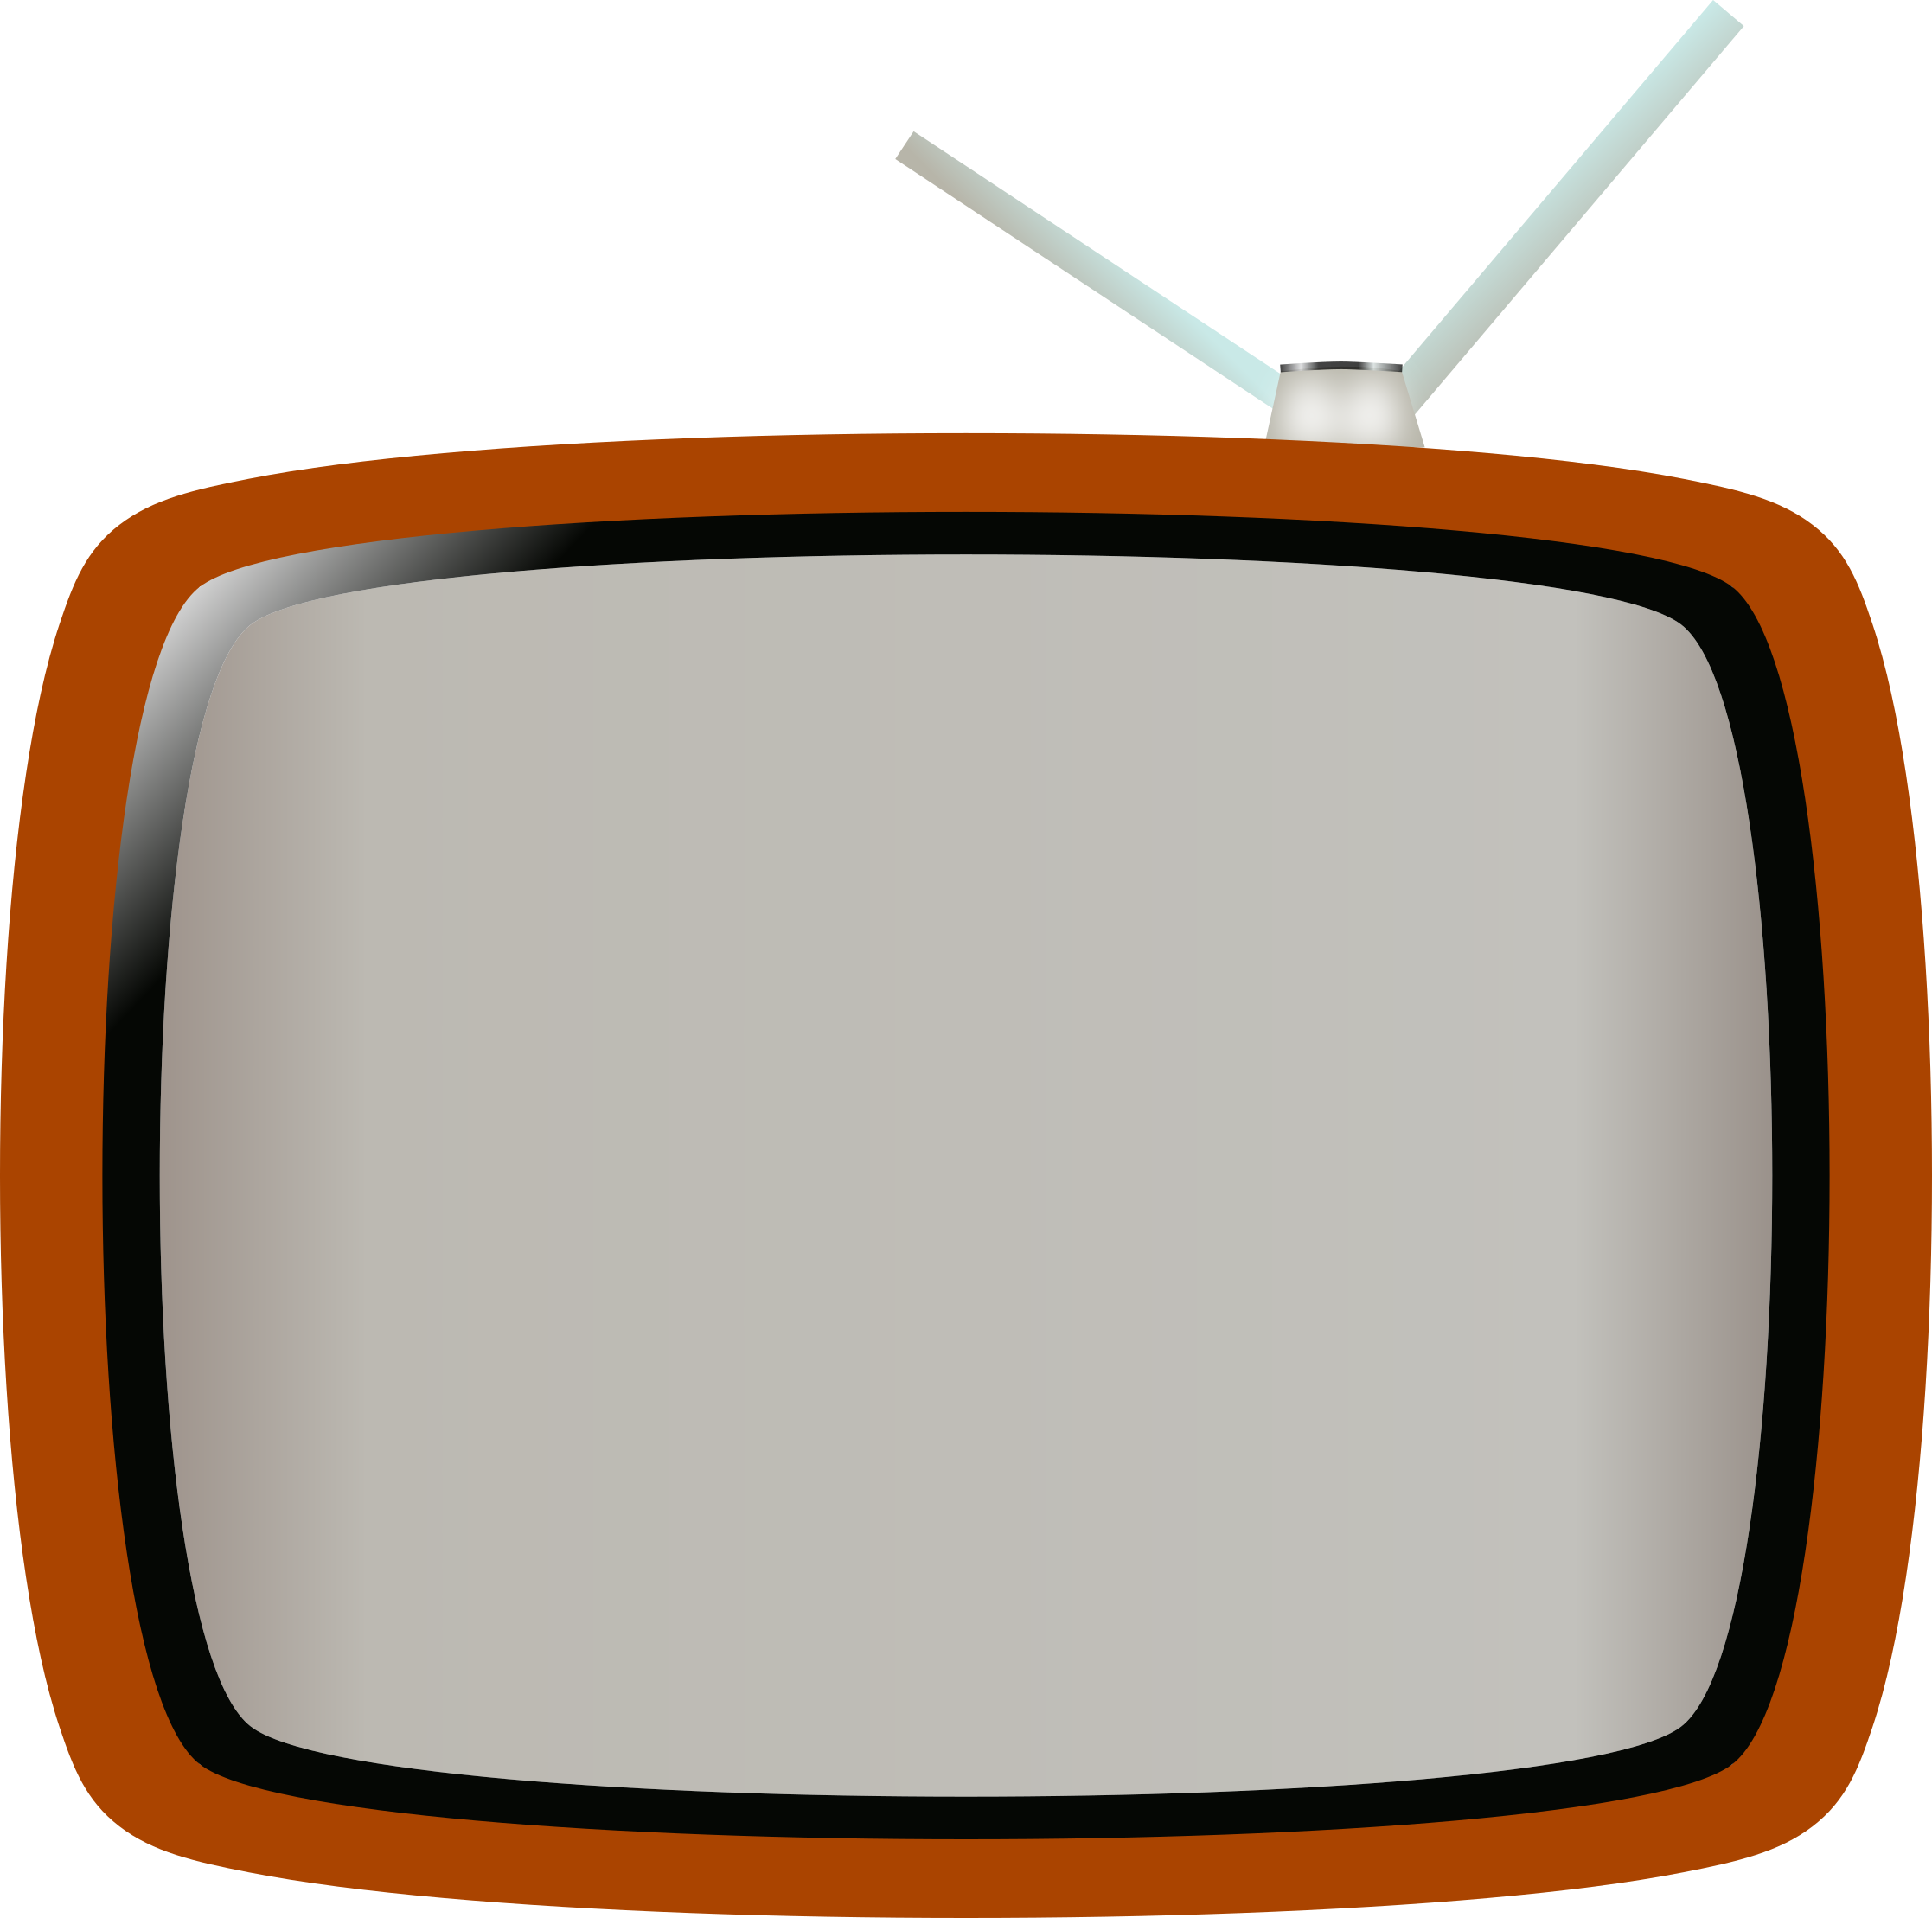 An Orange And White Television